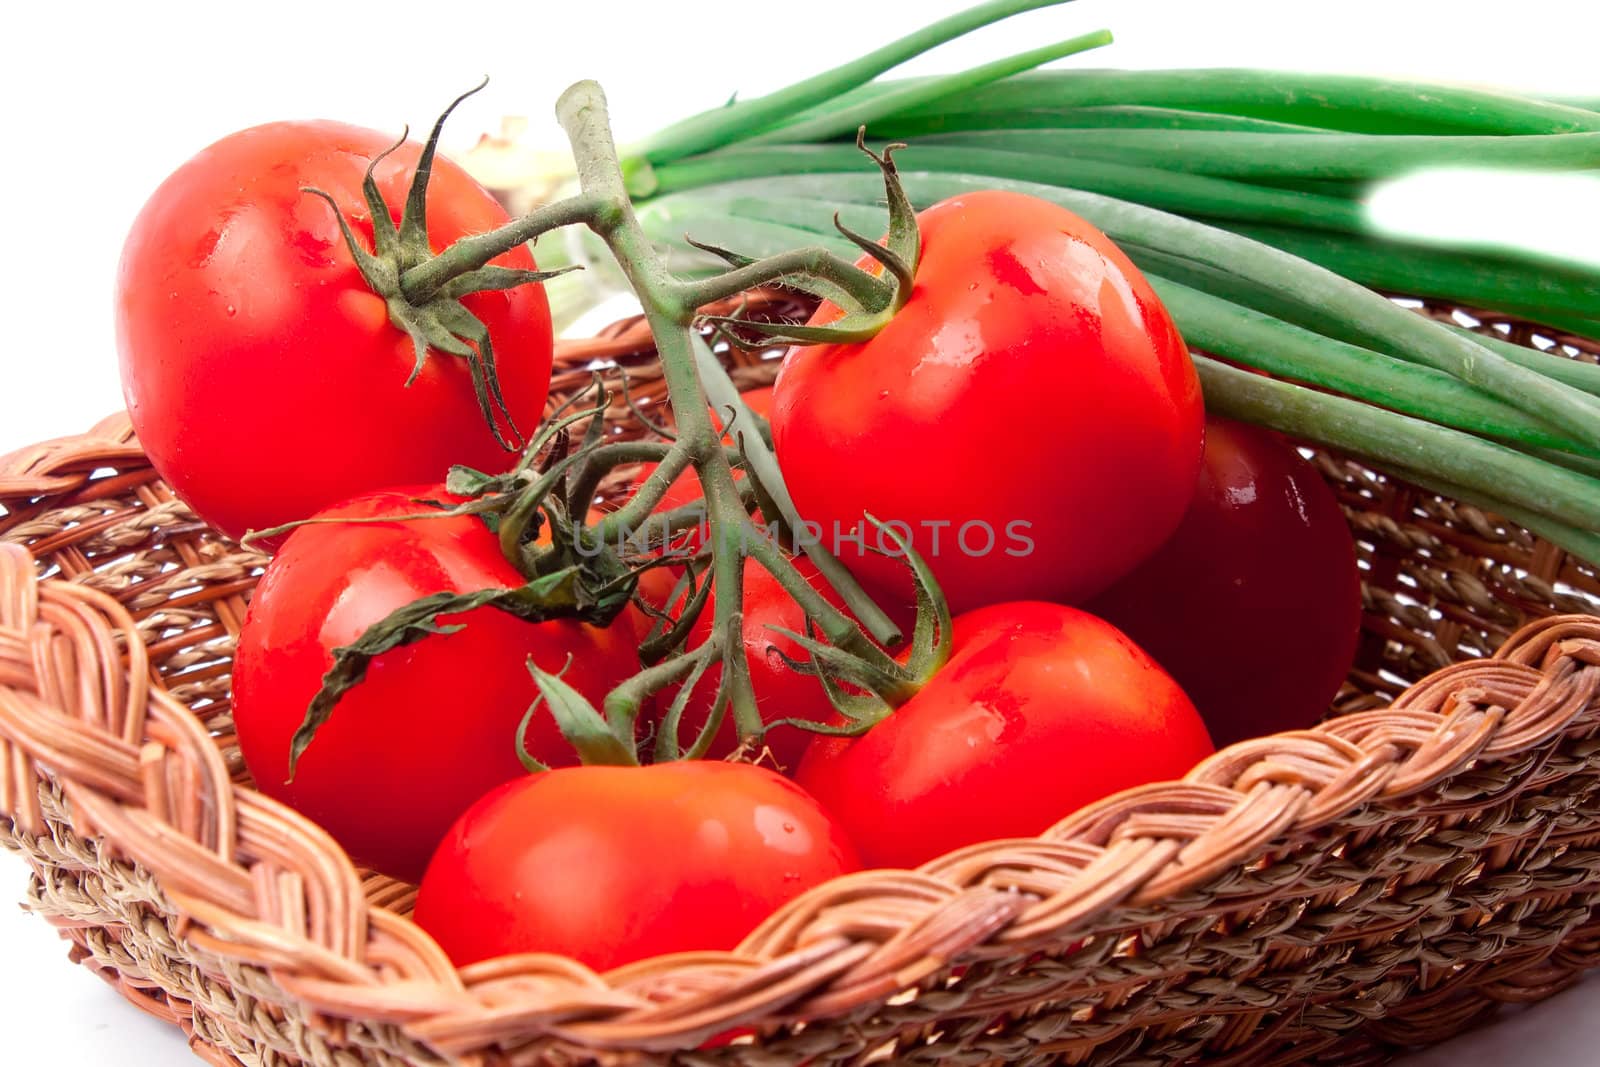 Red tomatoes in a basket on a white background